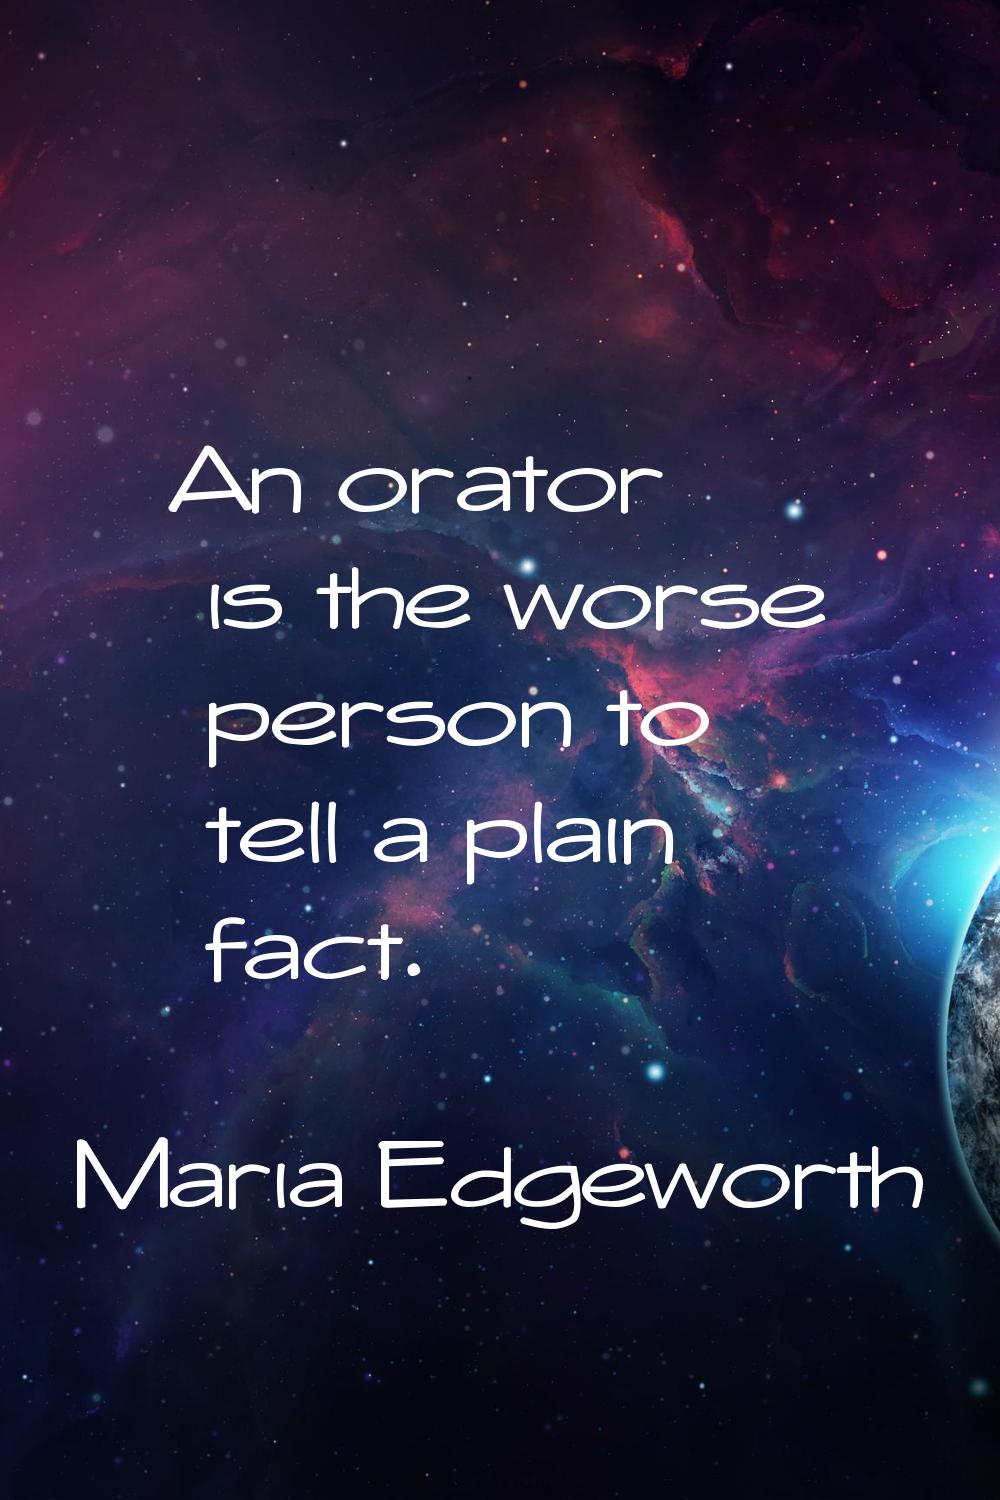 An orator is the worse person to tell a plain fact.